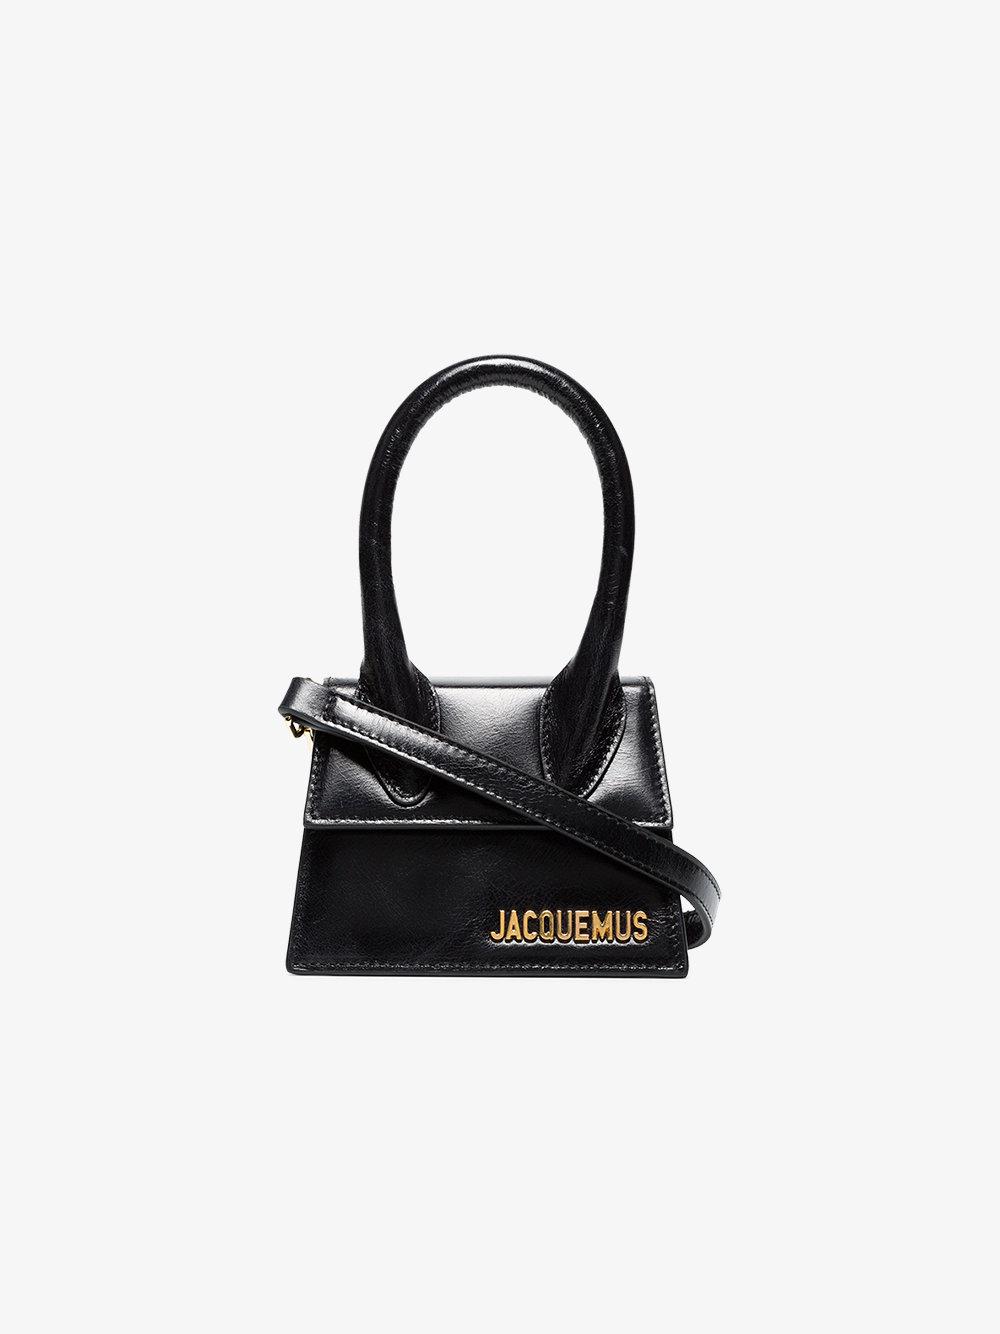 Jacquemus Leather Le Sac Chiquito in Black | Lyst